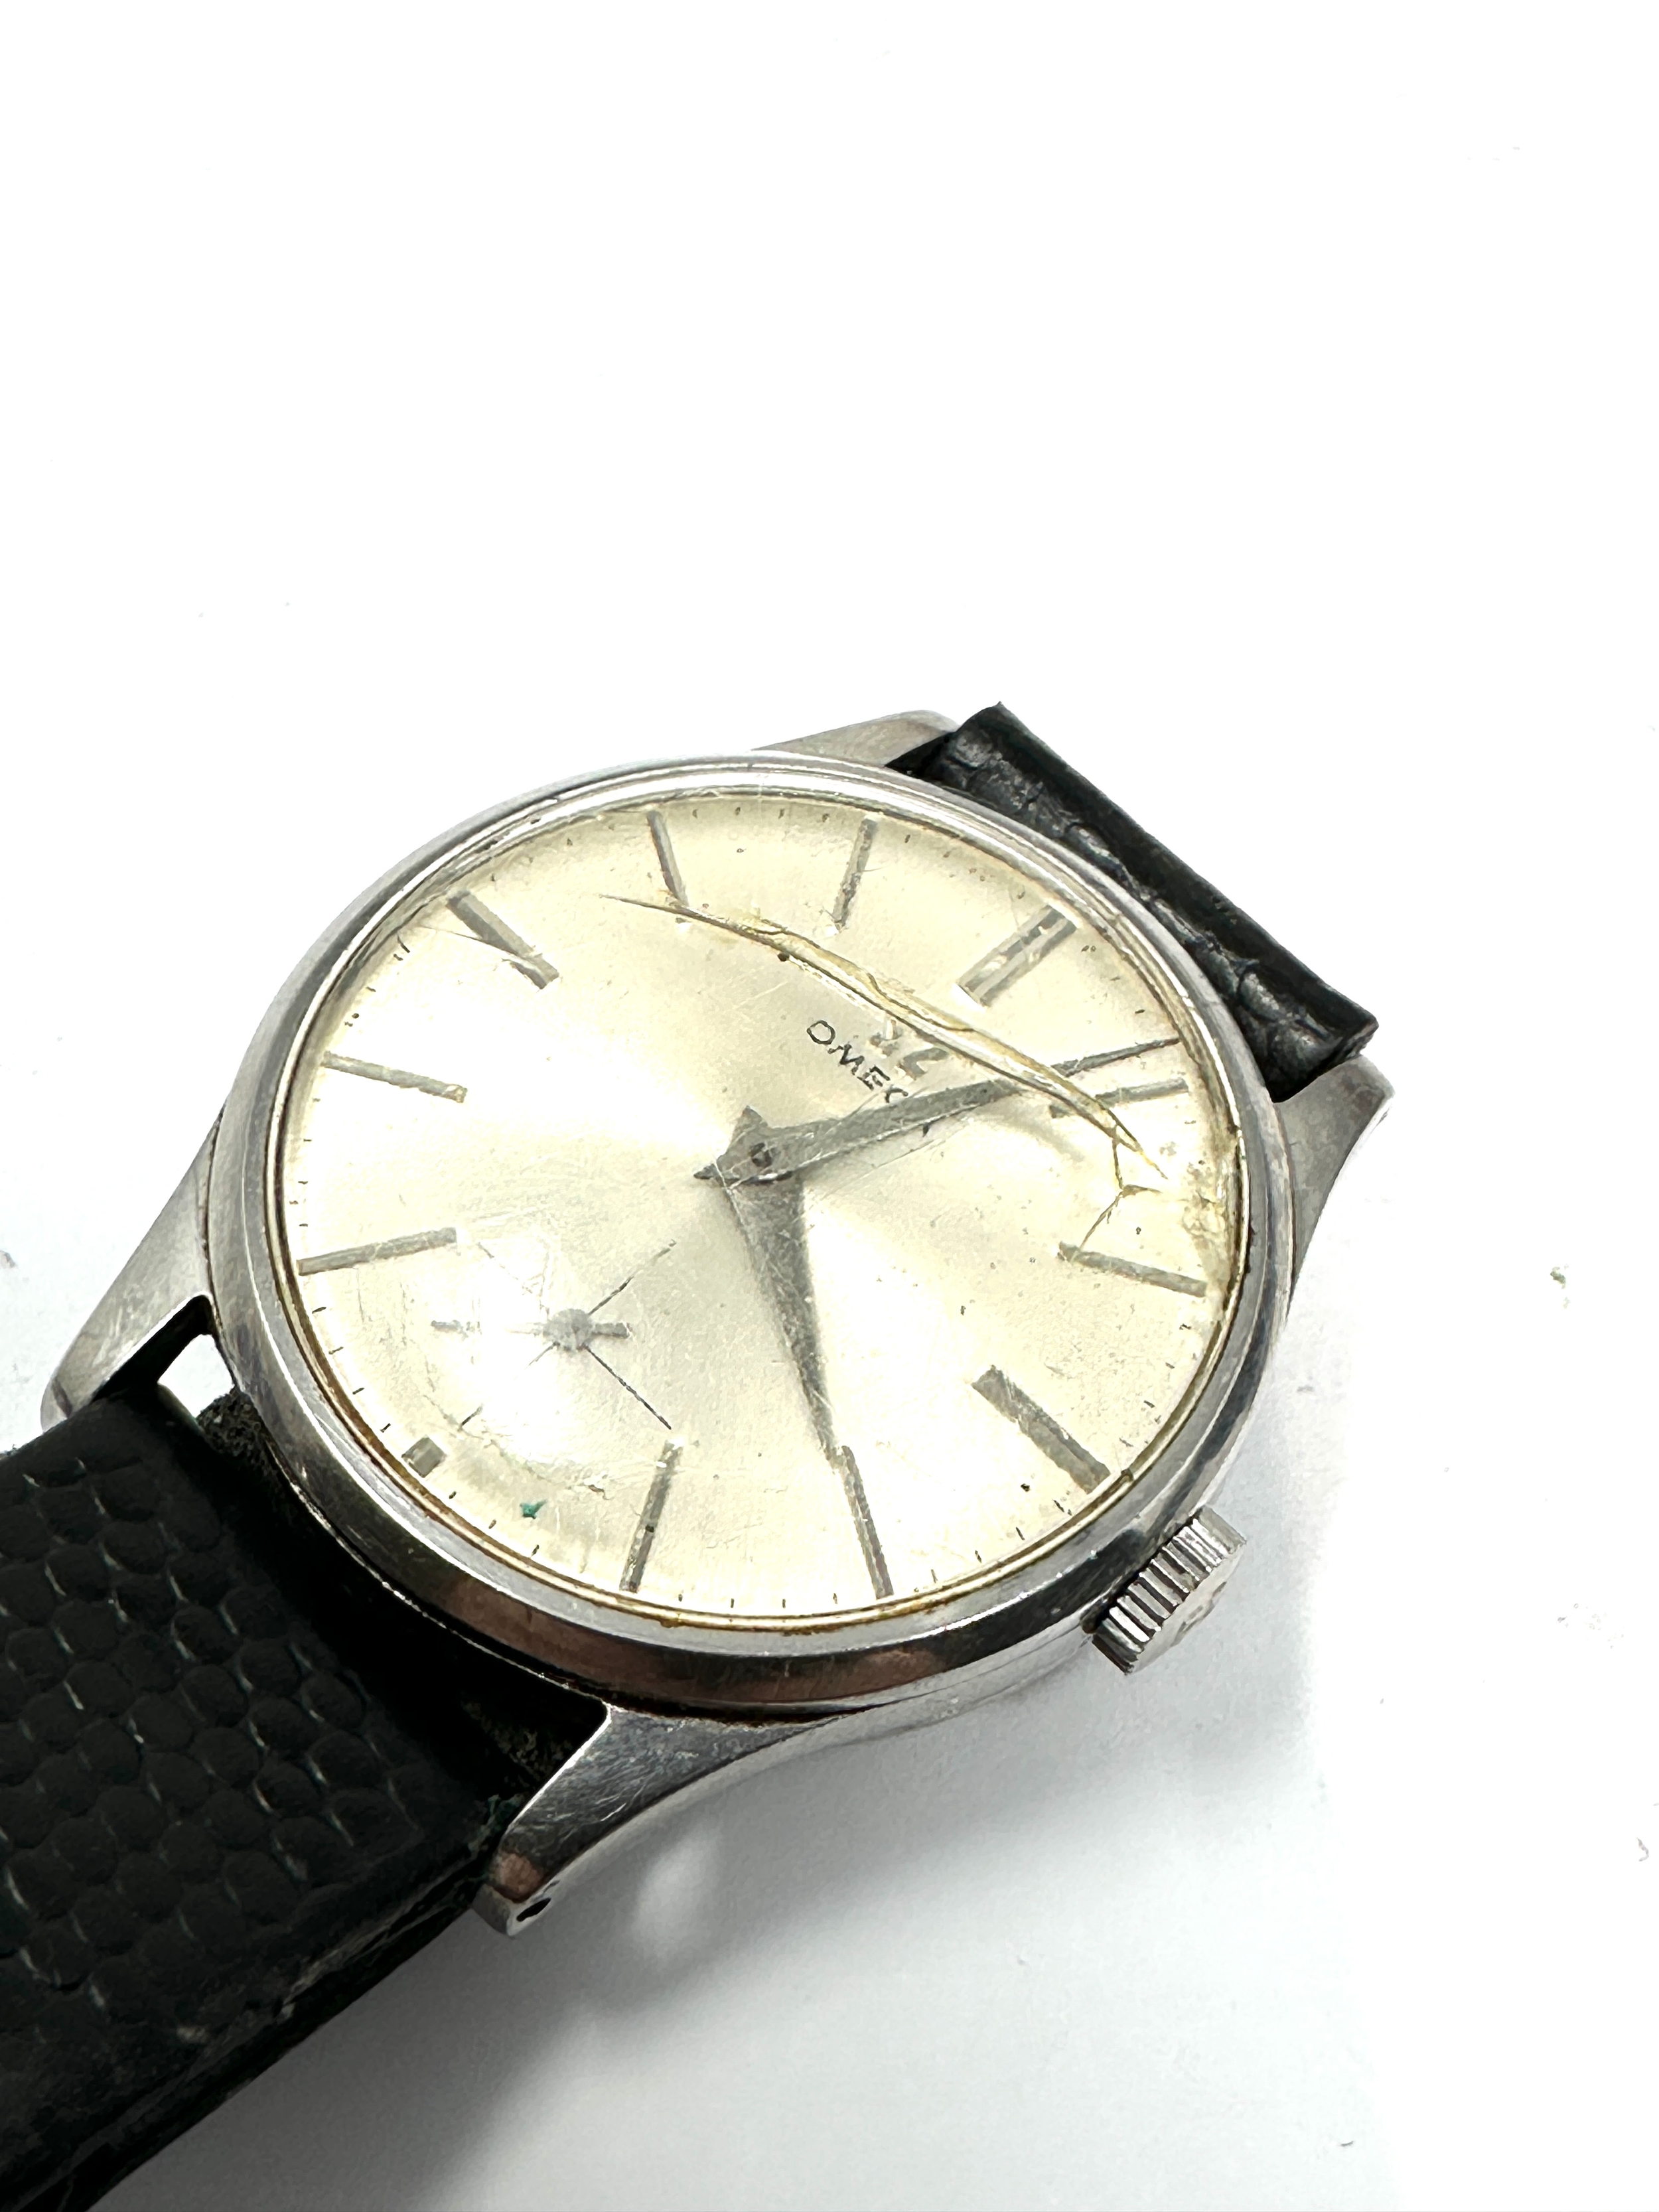 Vintage Omega manual wind gents wristwatch cal 266 steel cased crack to glass the watch is ticking